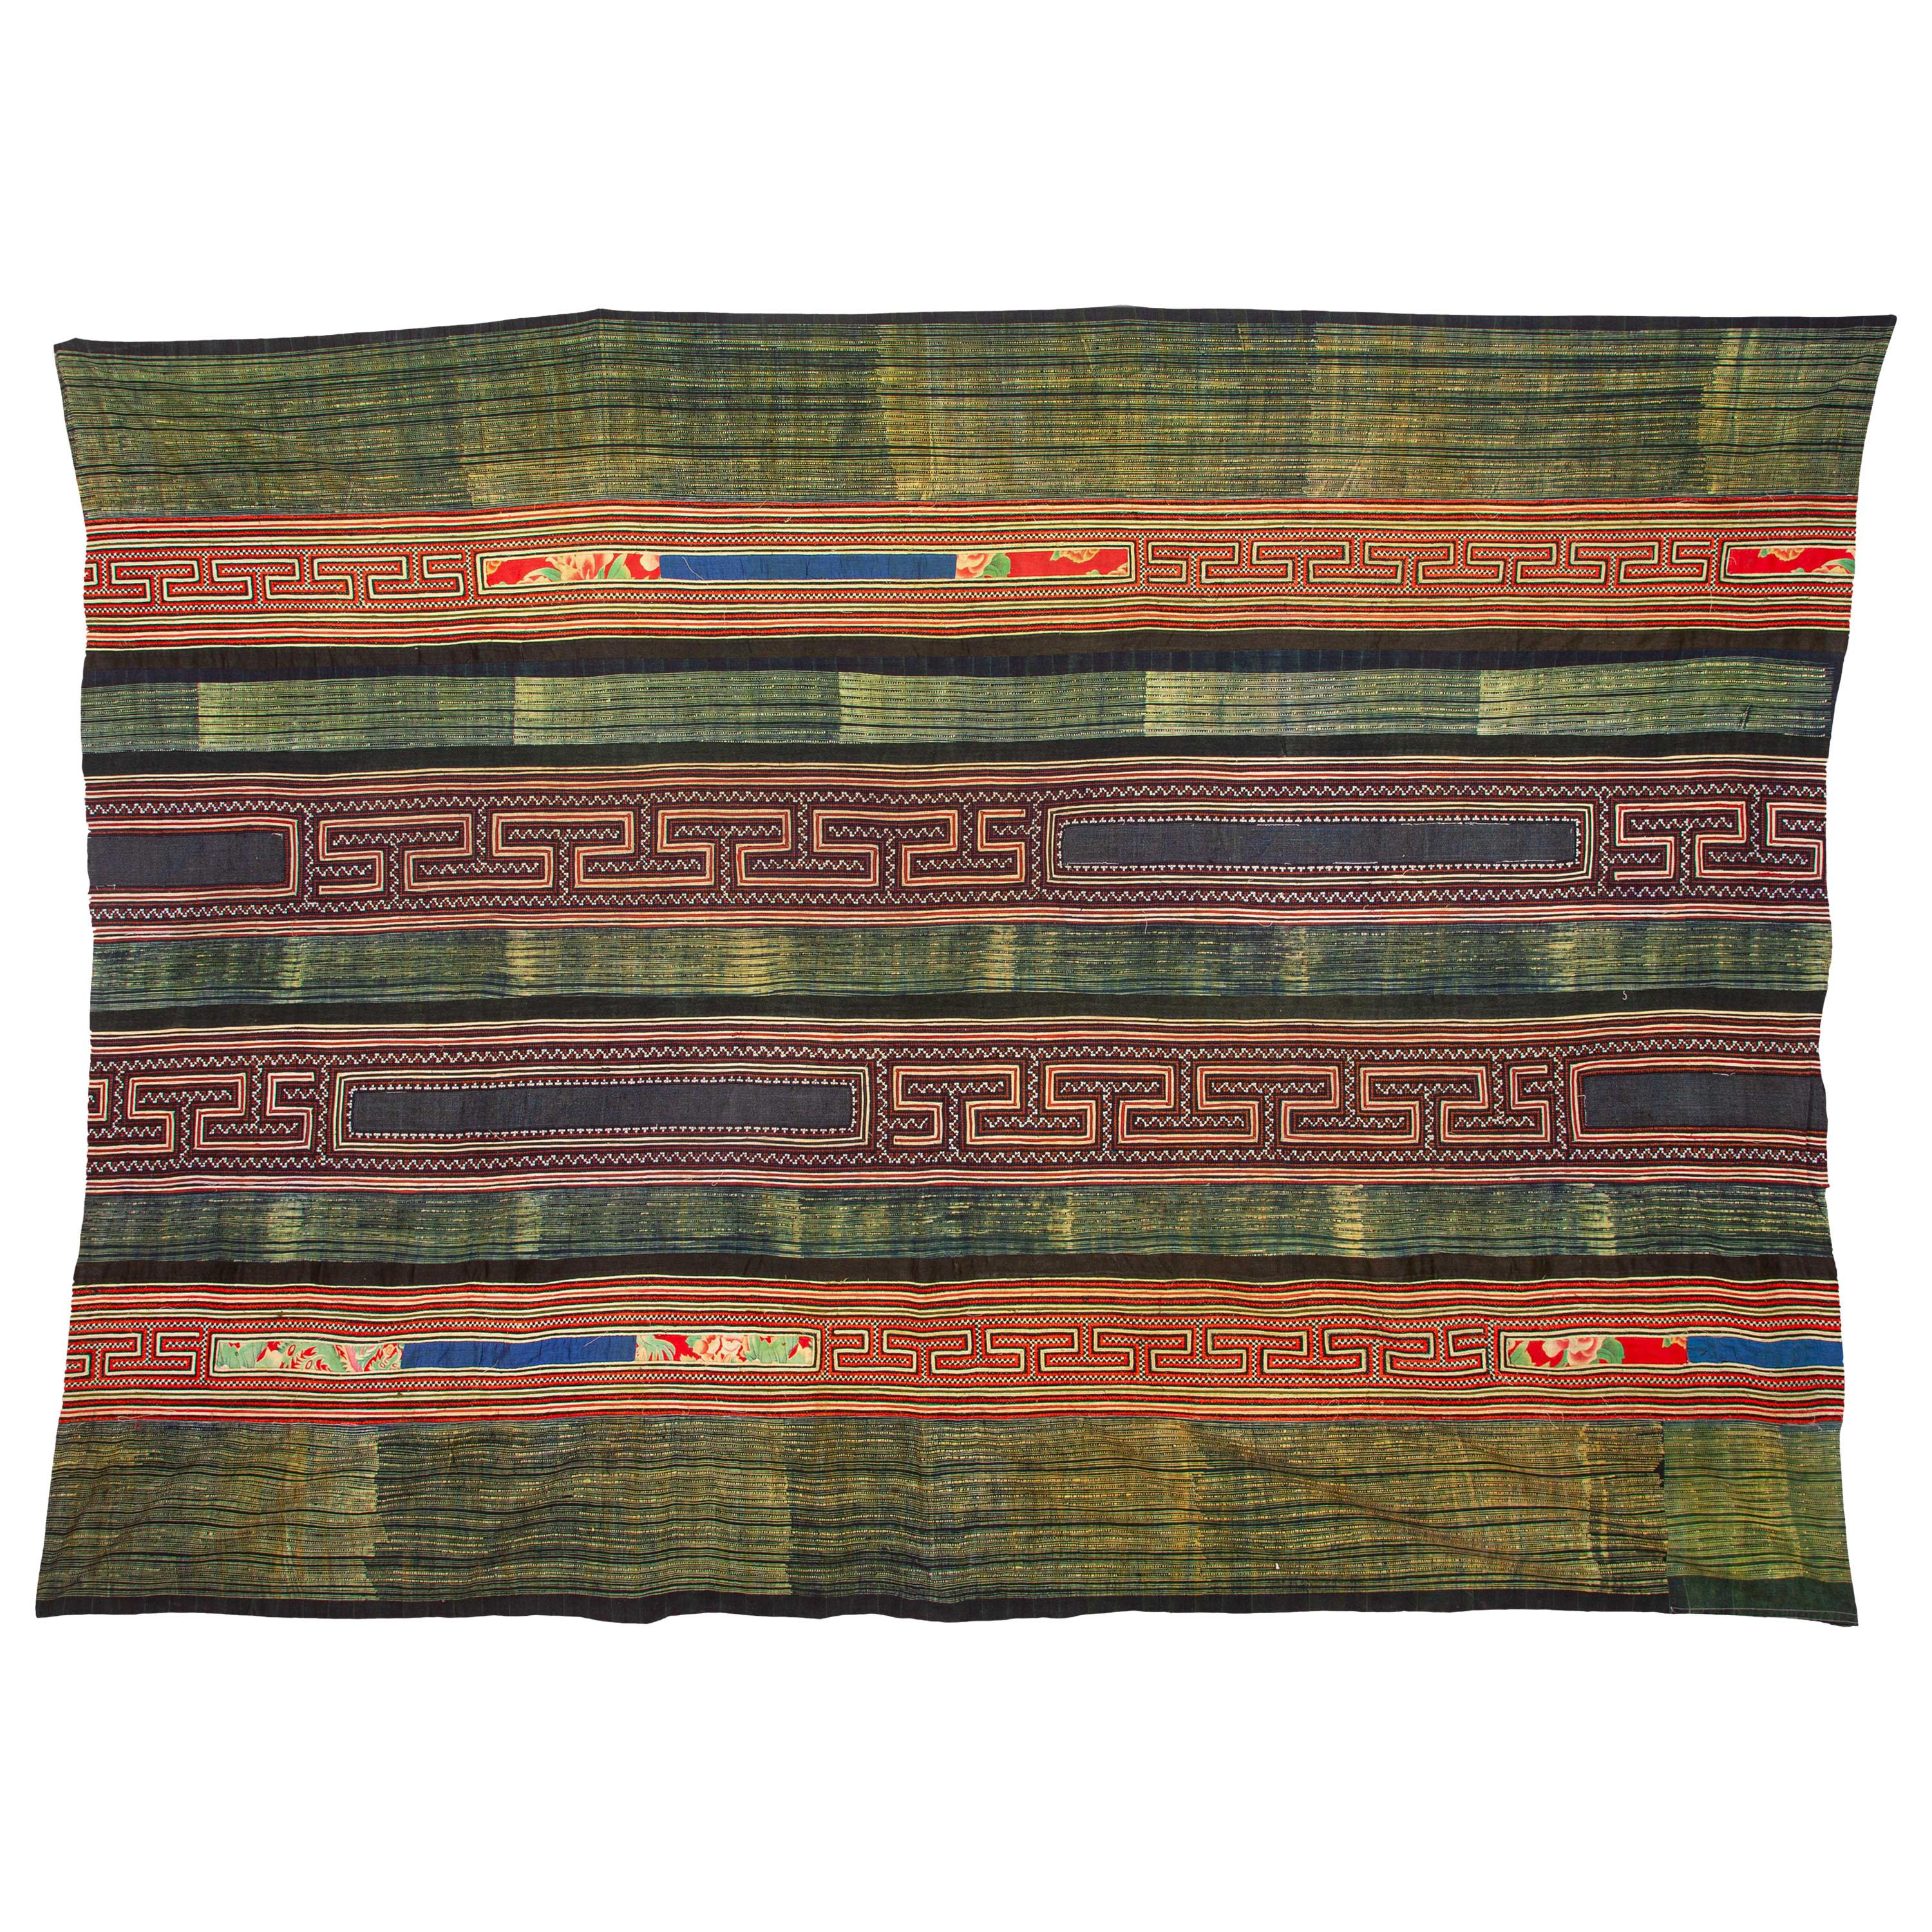 Hmong Batik and Embroidered Blanket with Indigo Based Green Color For Sale